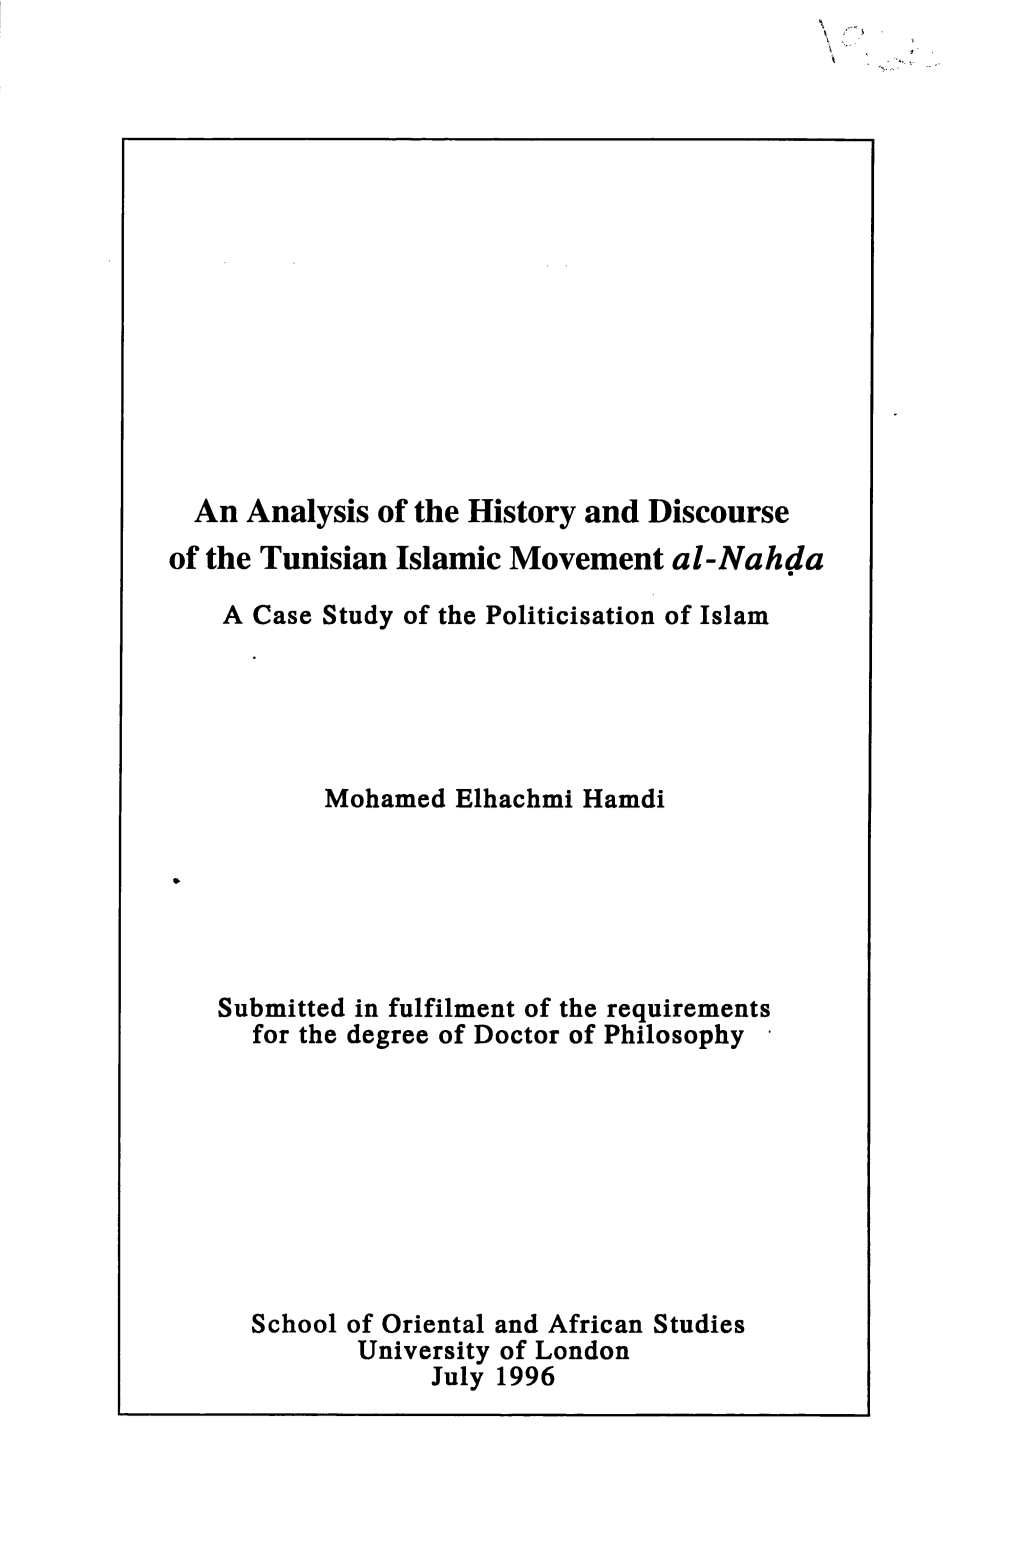 An Analysis of the History and Discourse of the Tunisian Islamic Movemental-Nahda M a Case Study of the Politicisation of Islam